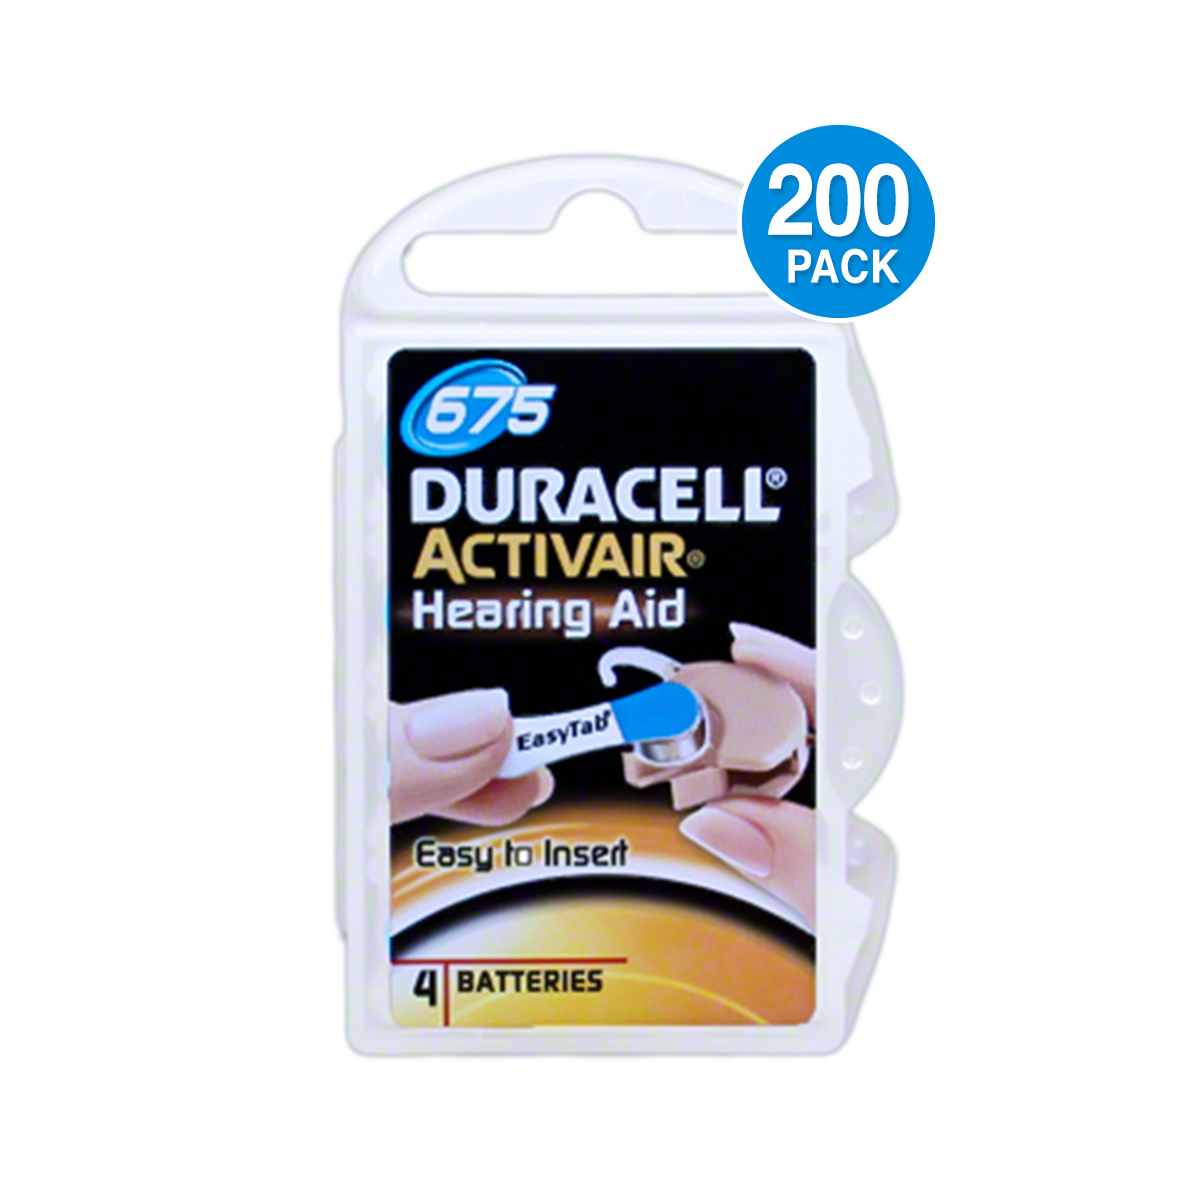 Duracell Hearing Aid Battery Size 675 (200 Pcs)